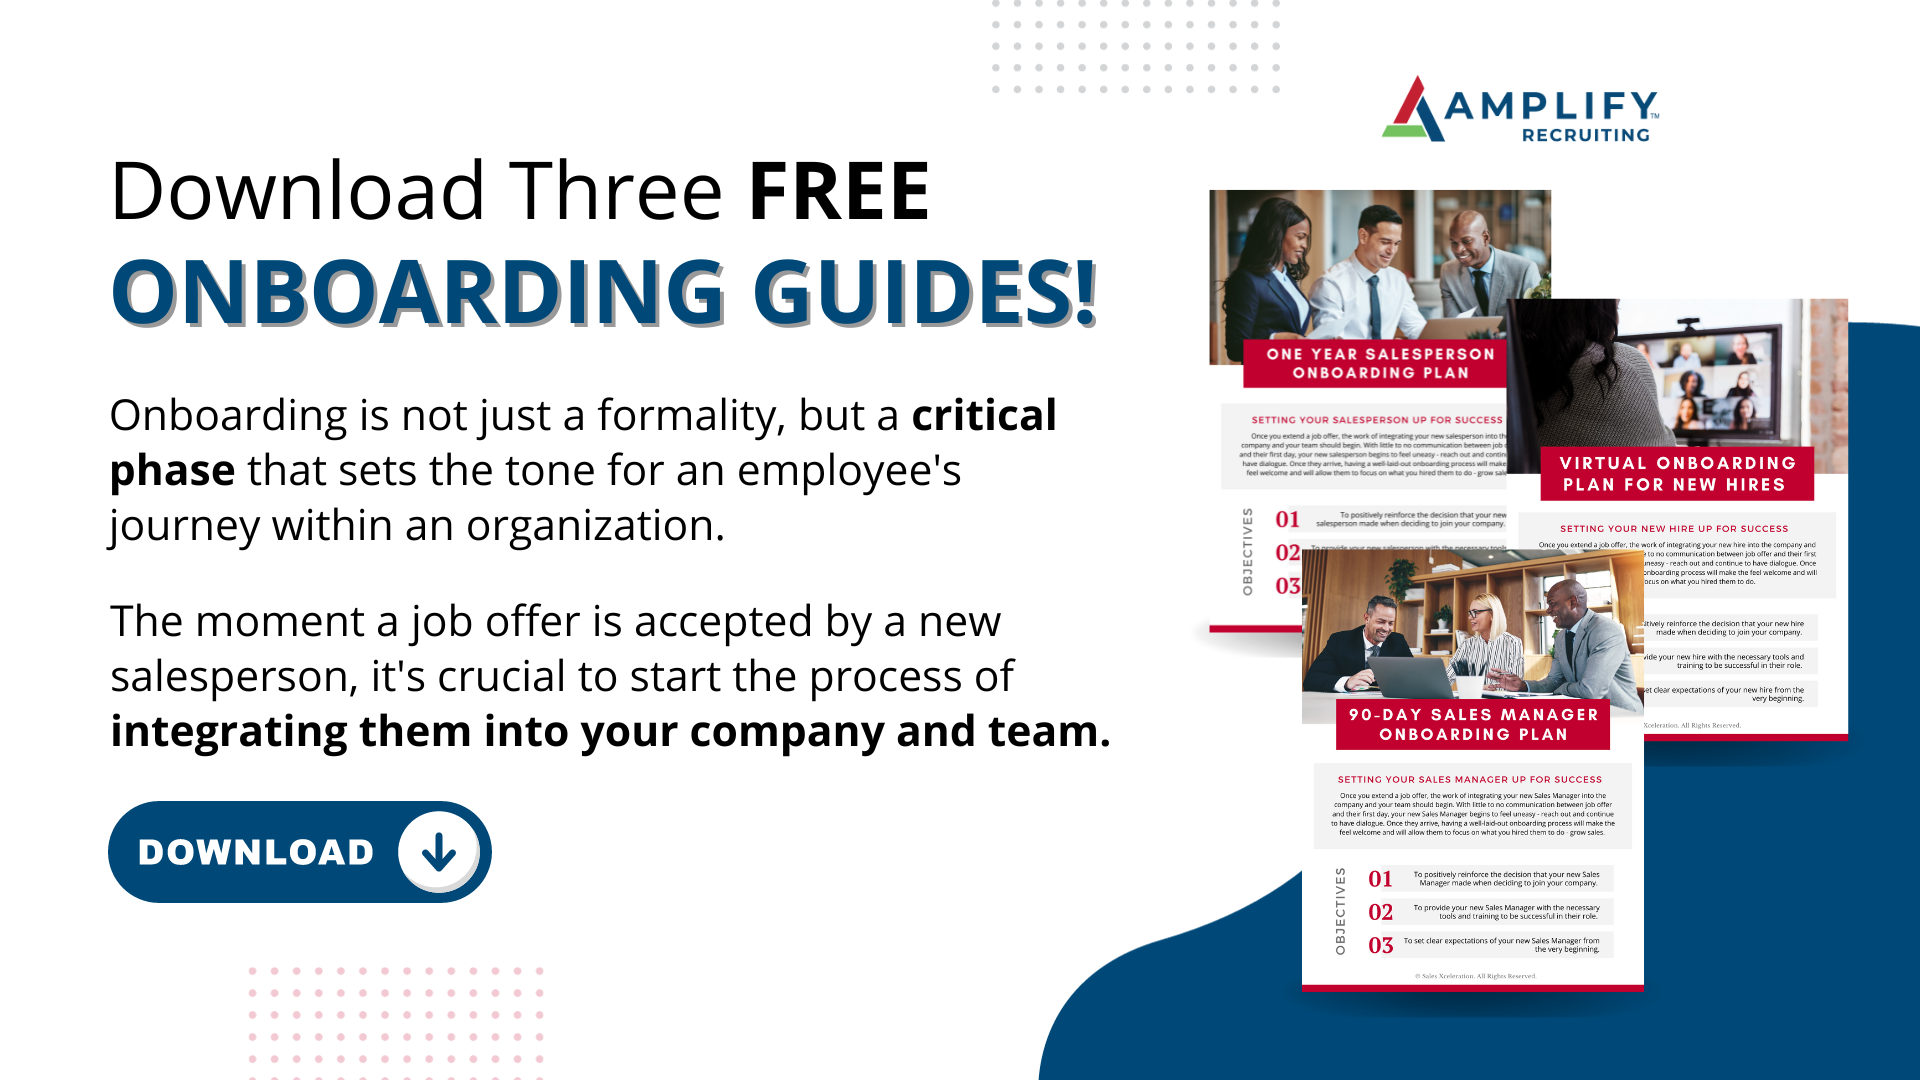 Download Three FREE ONBOARDING GUIDES!